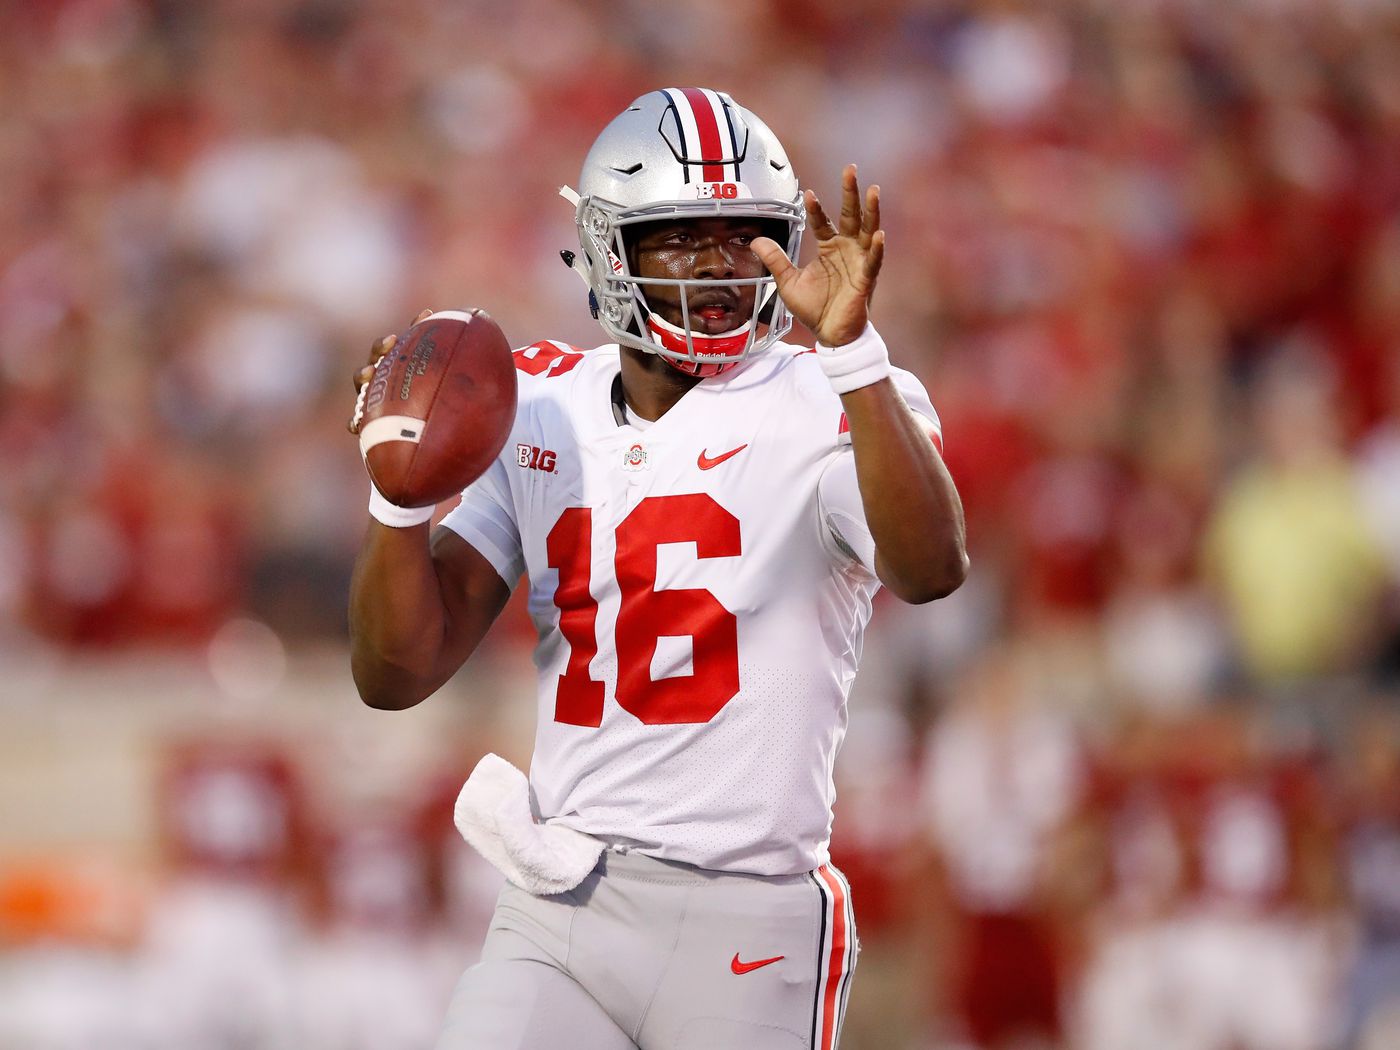 Jt barrett signed to pittsburgh steelers practice squad